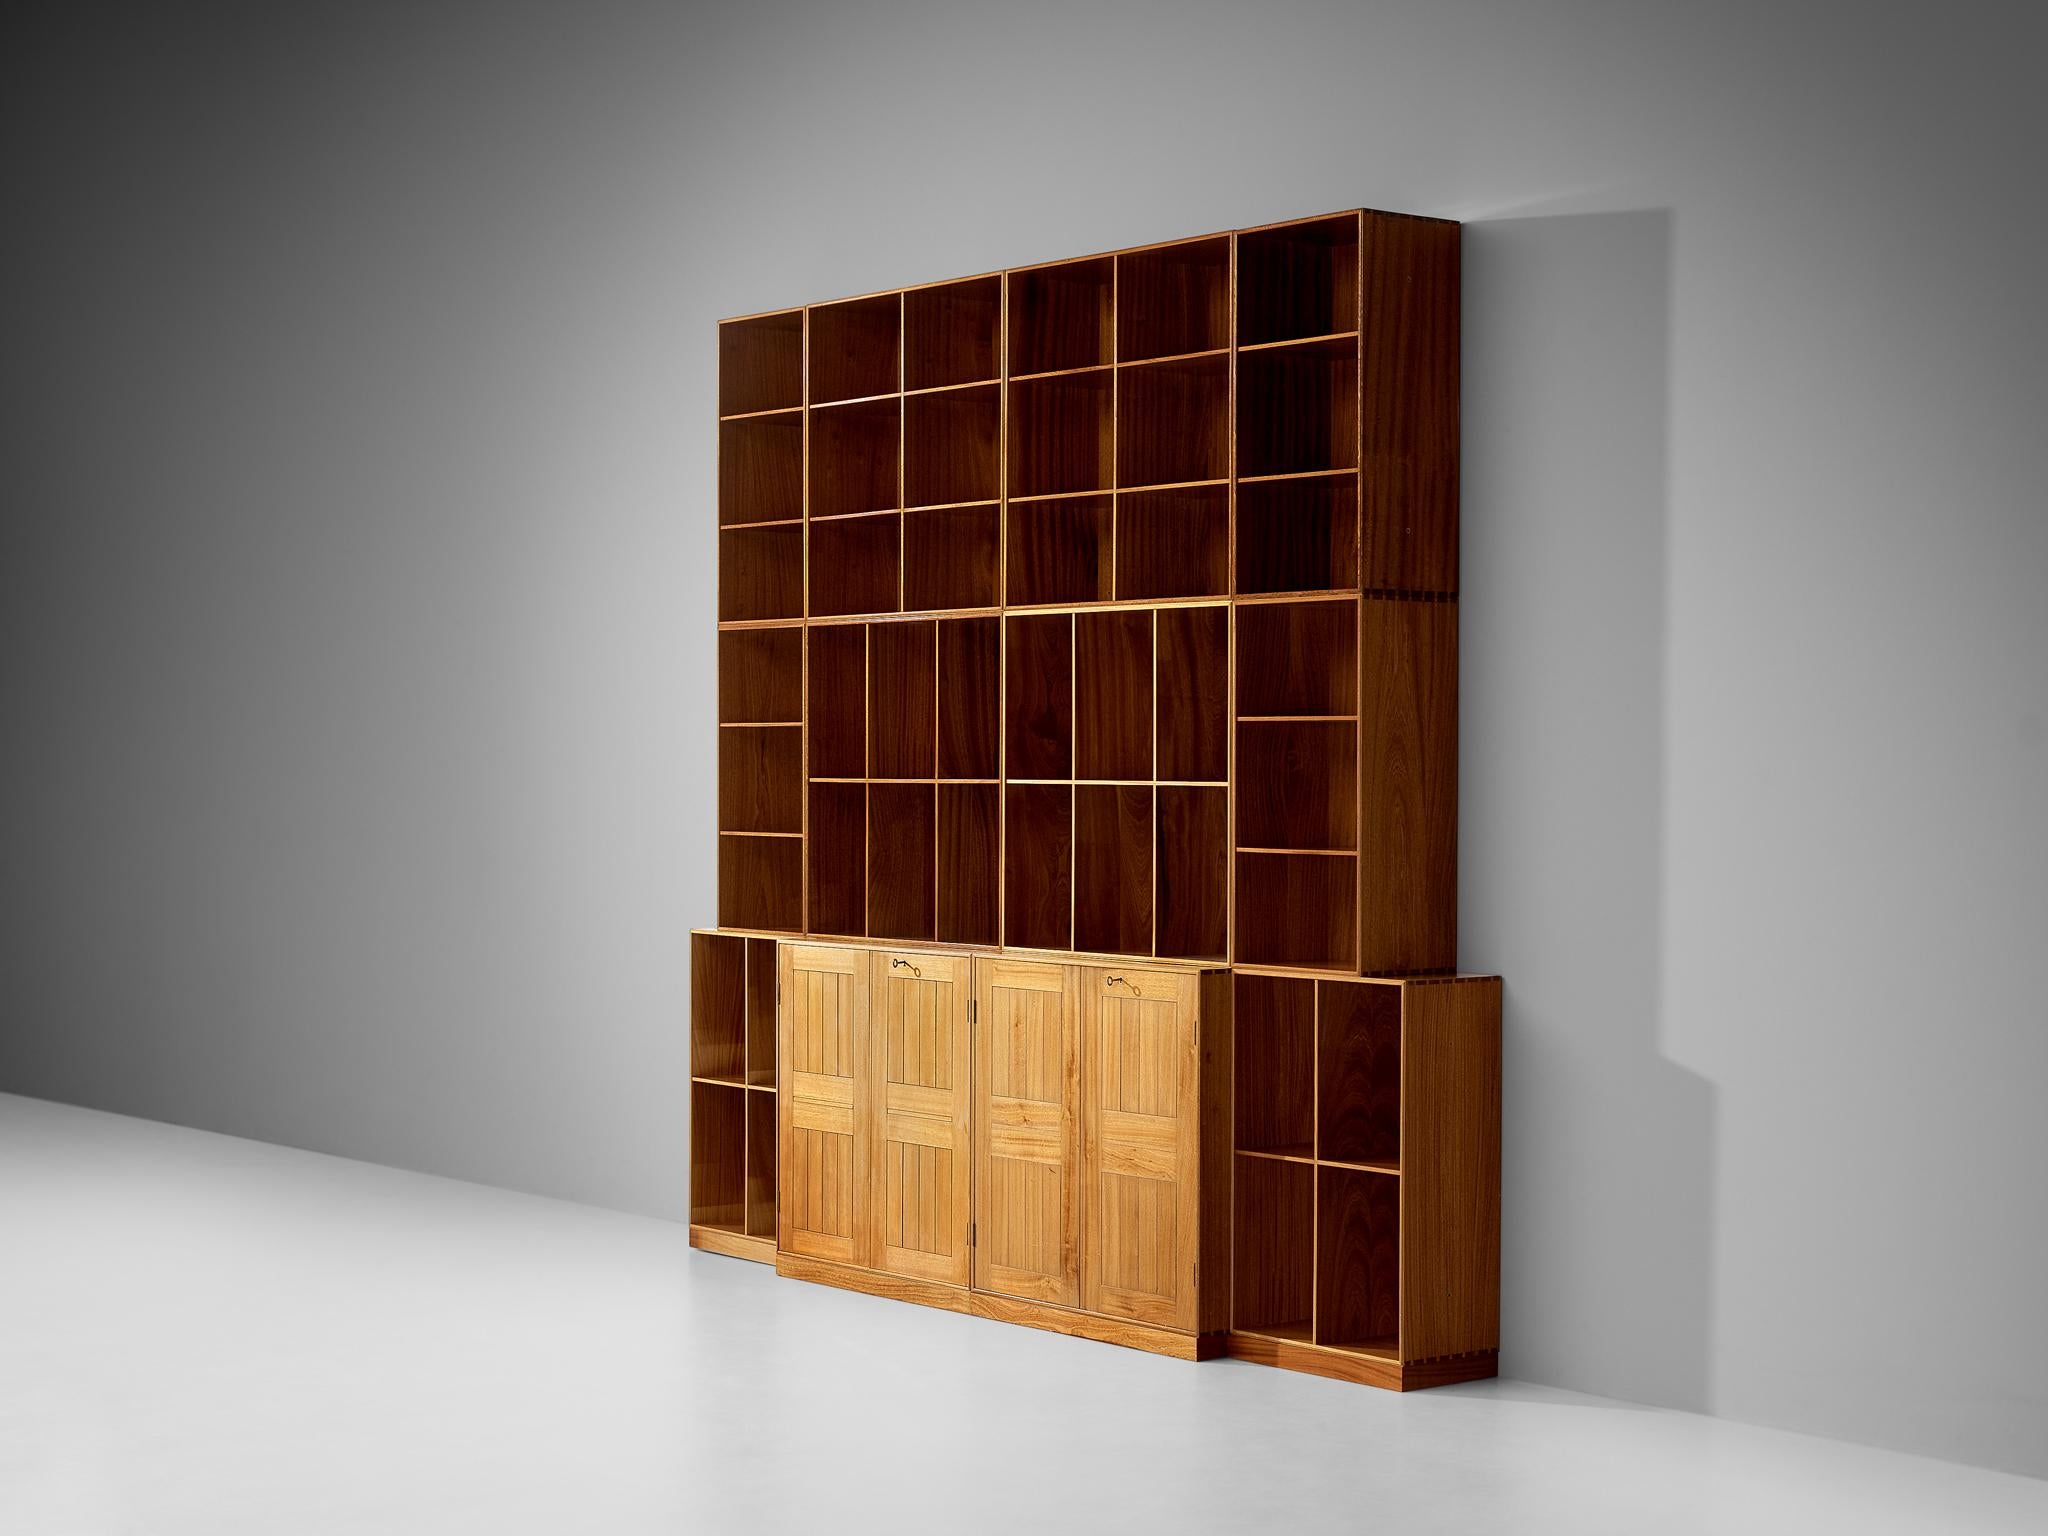 Mogens Koch for Rud Rasmussen, modular book case or library, mahogany, Denmark, 1950s

Intriguing and substantial modular library by Danish designer Mogens Koch. This piece is constructed from different elements to form this great wall unit or